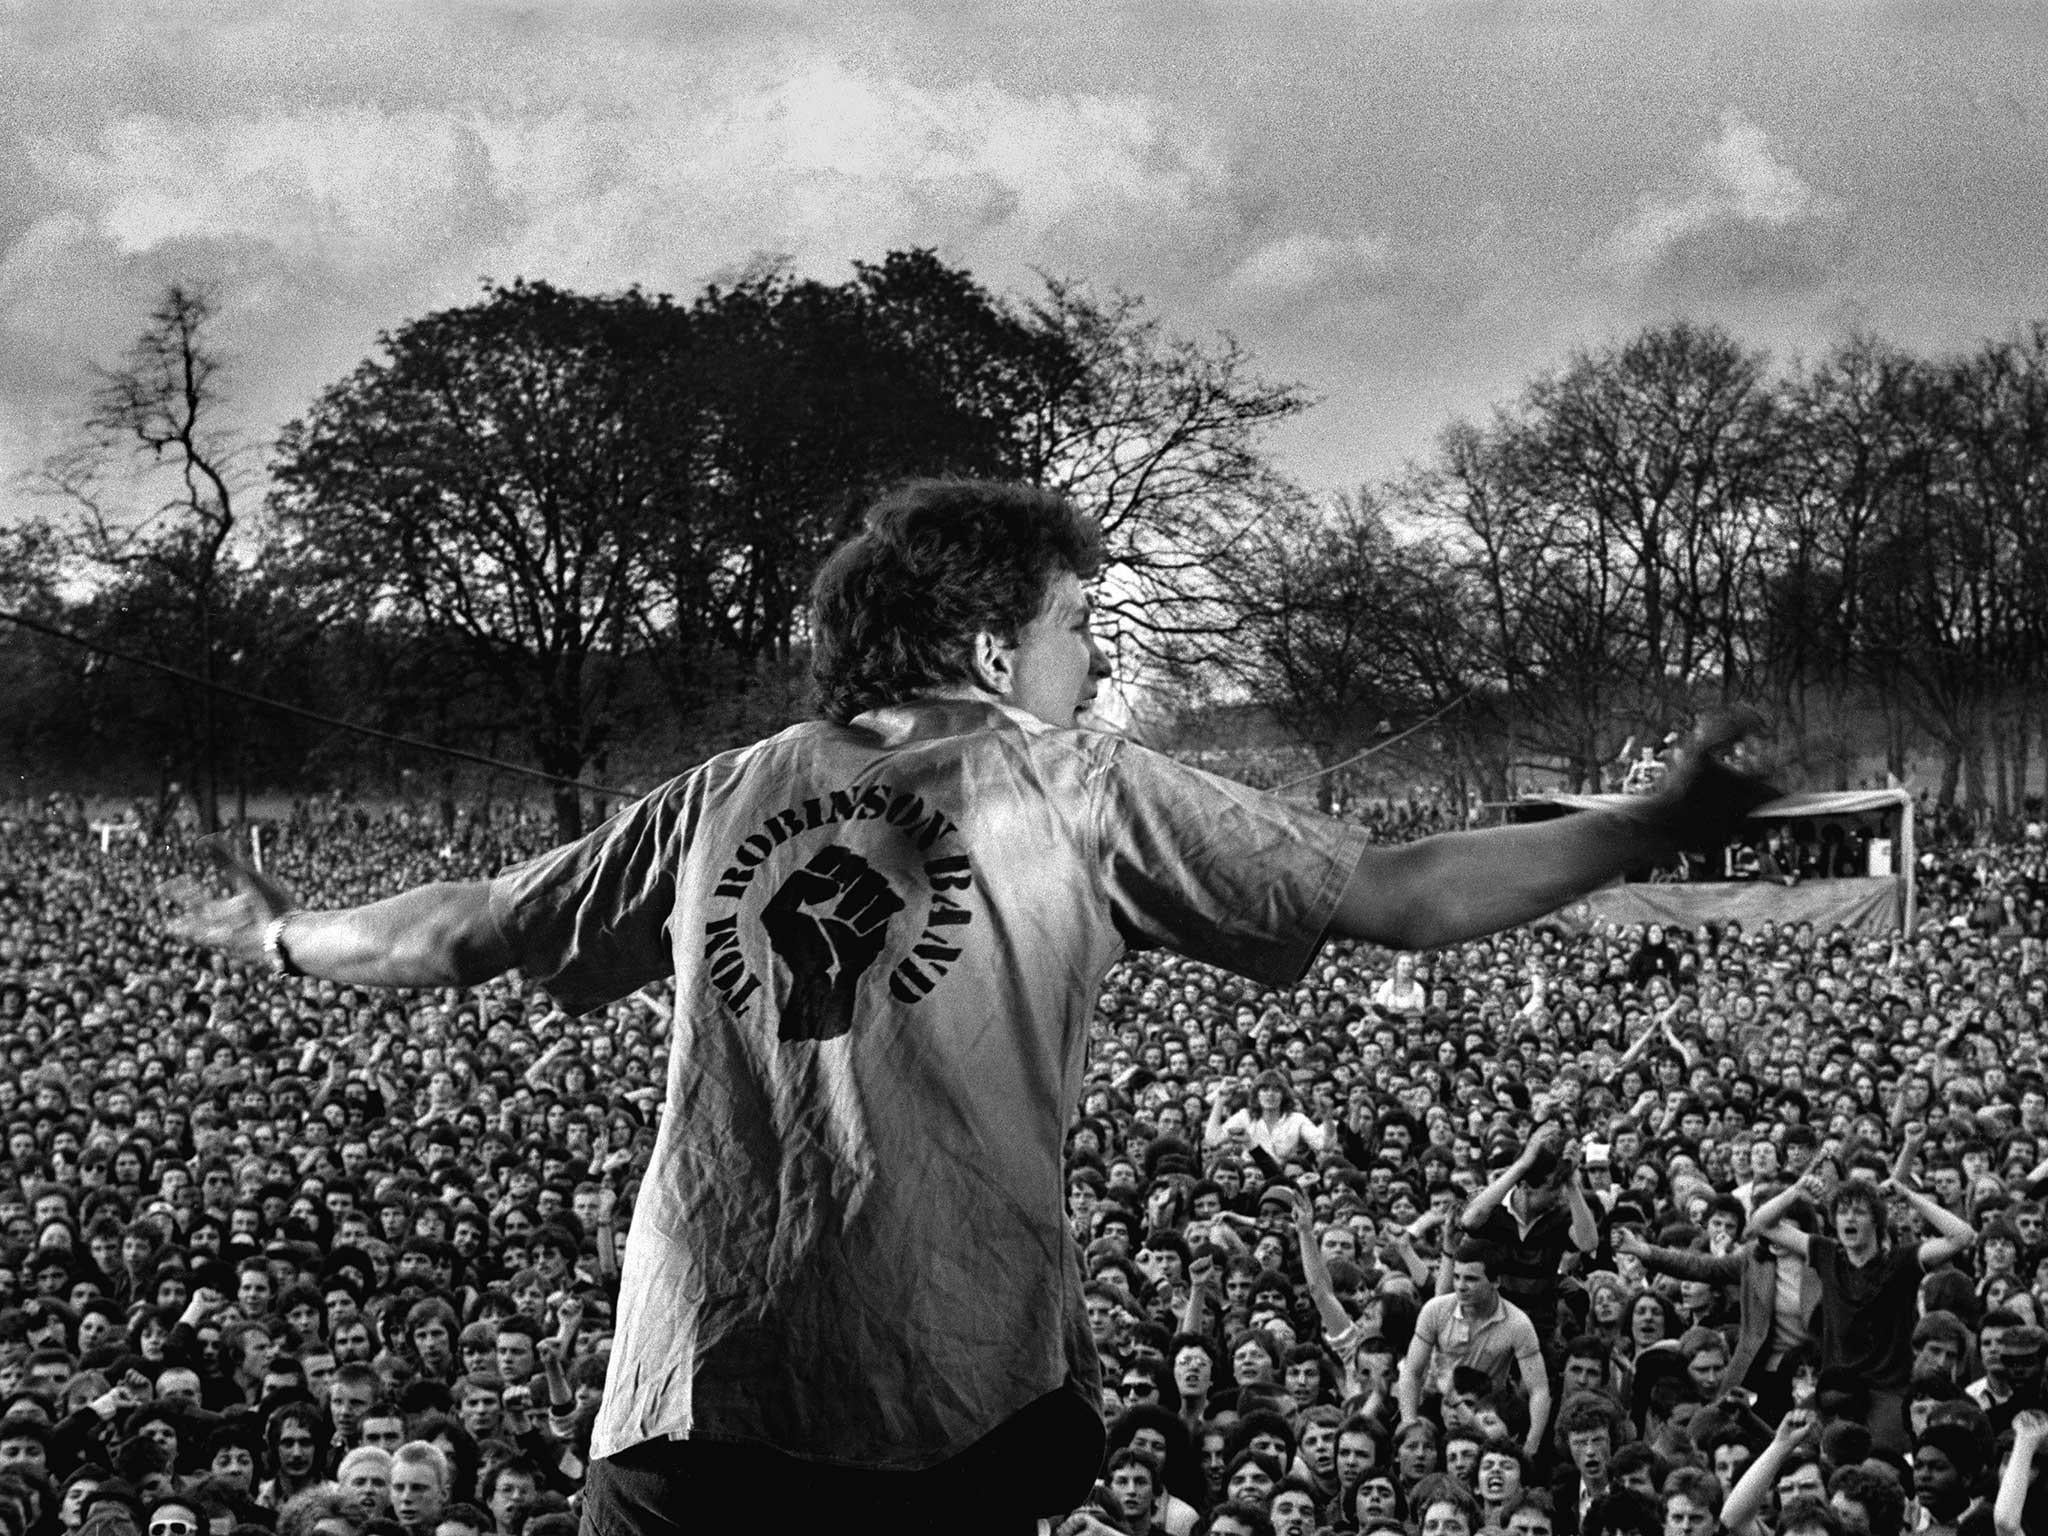 Tom Robinson at Carnival 1, Victoria Park, East London